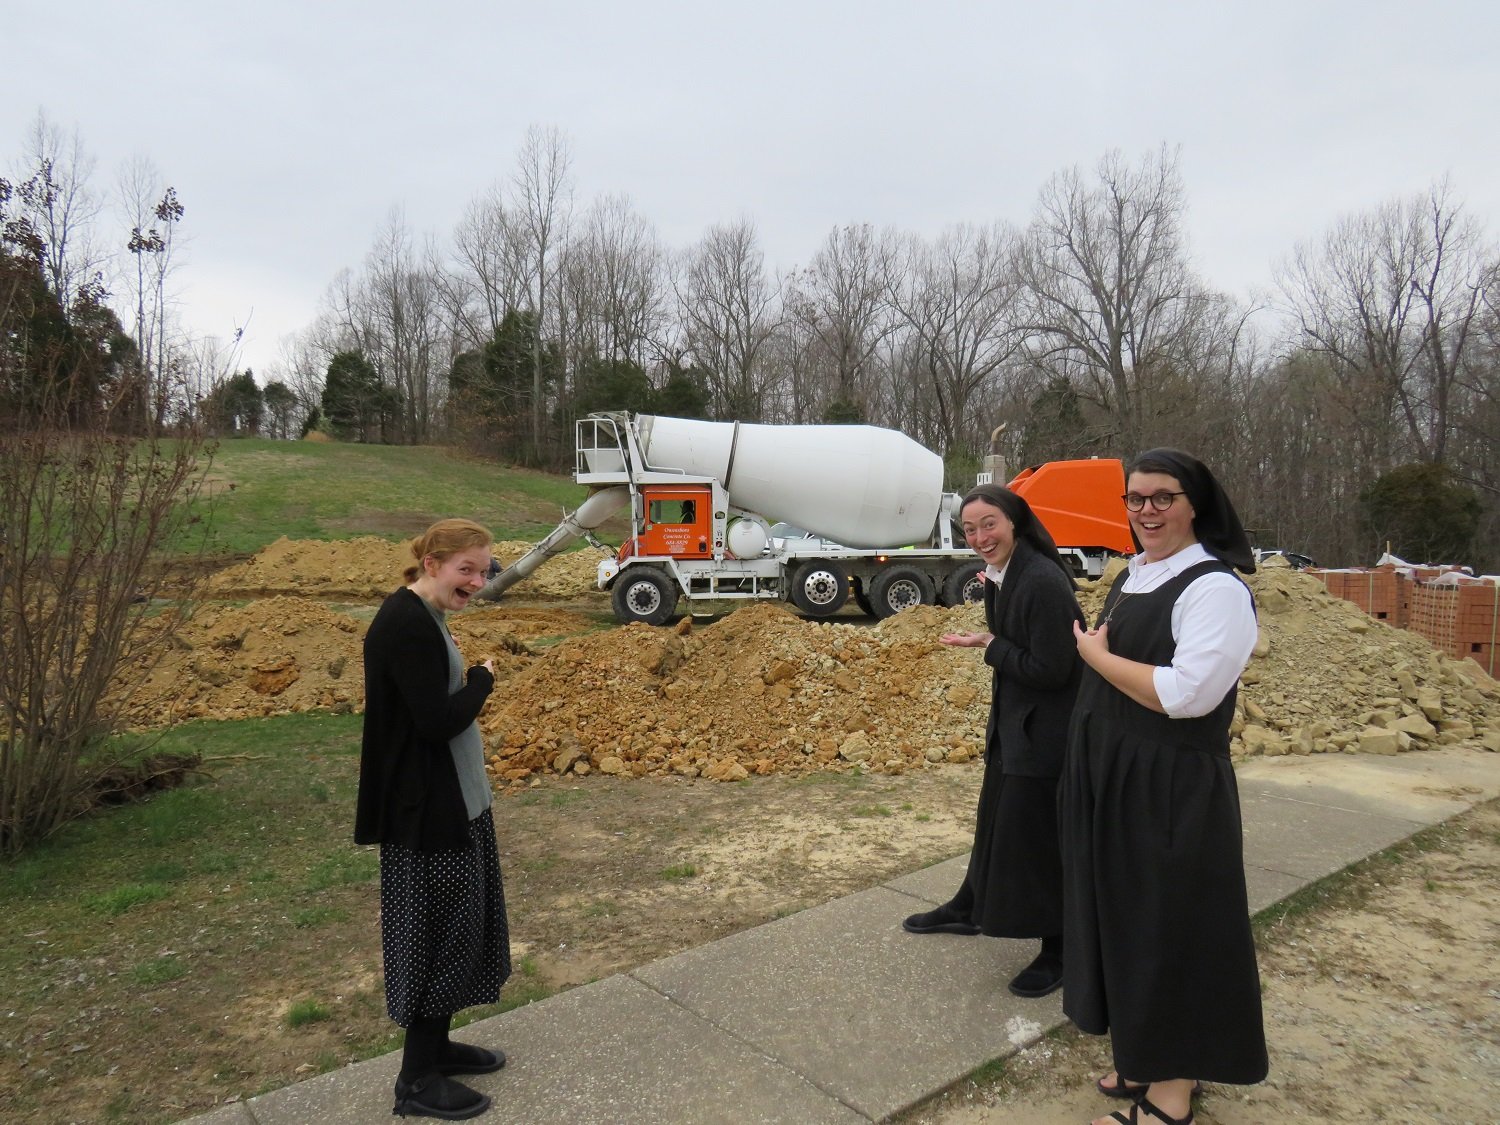  Aspirant Emma and Postulants Holly and Hannah are very happy to see that concrete truck! 